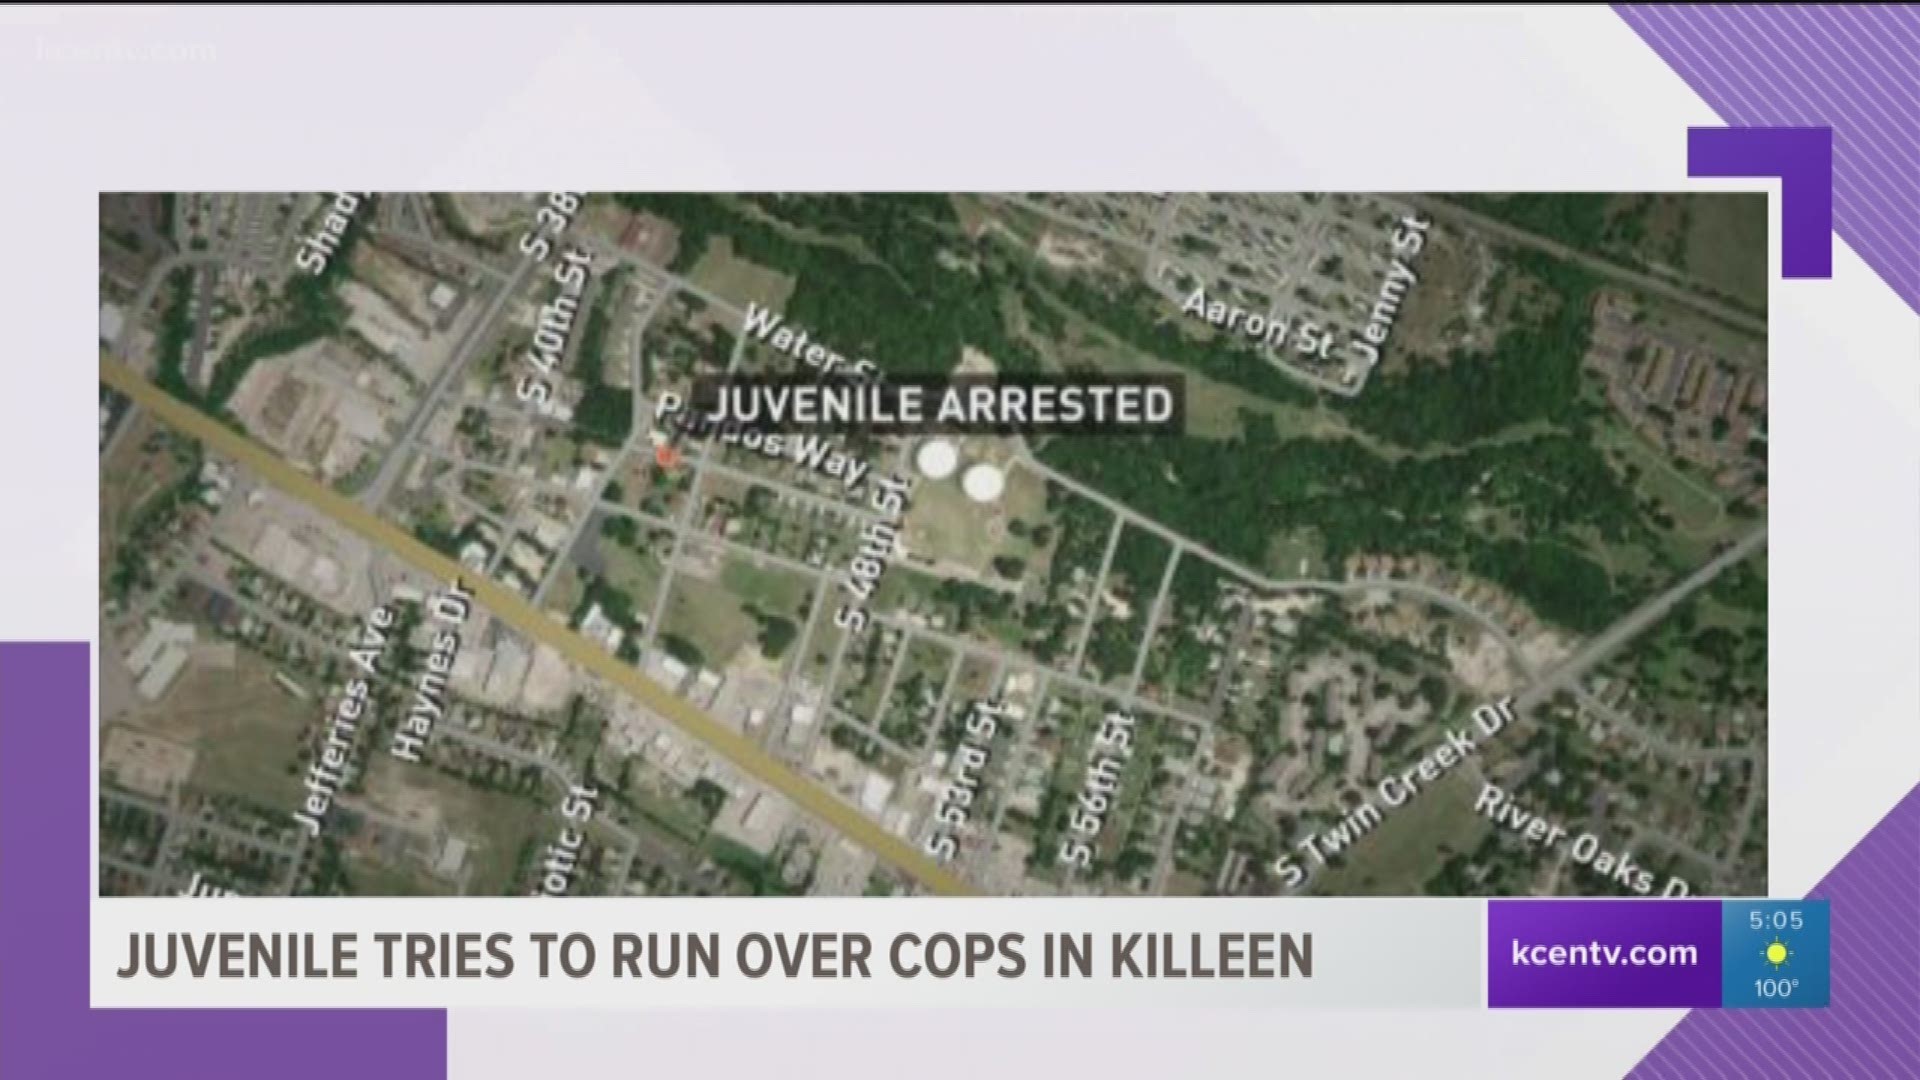 Killeen police opened fire on the stolen vehicle when the juvenile tried to run over an officer. The suspect was arrested after crashing into a house.